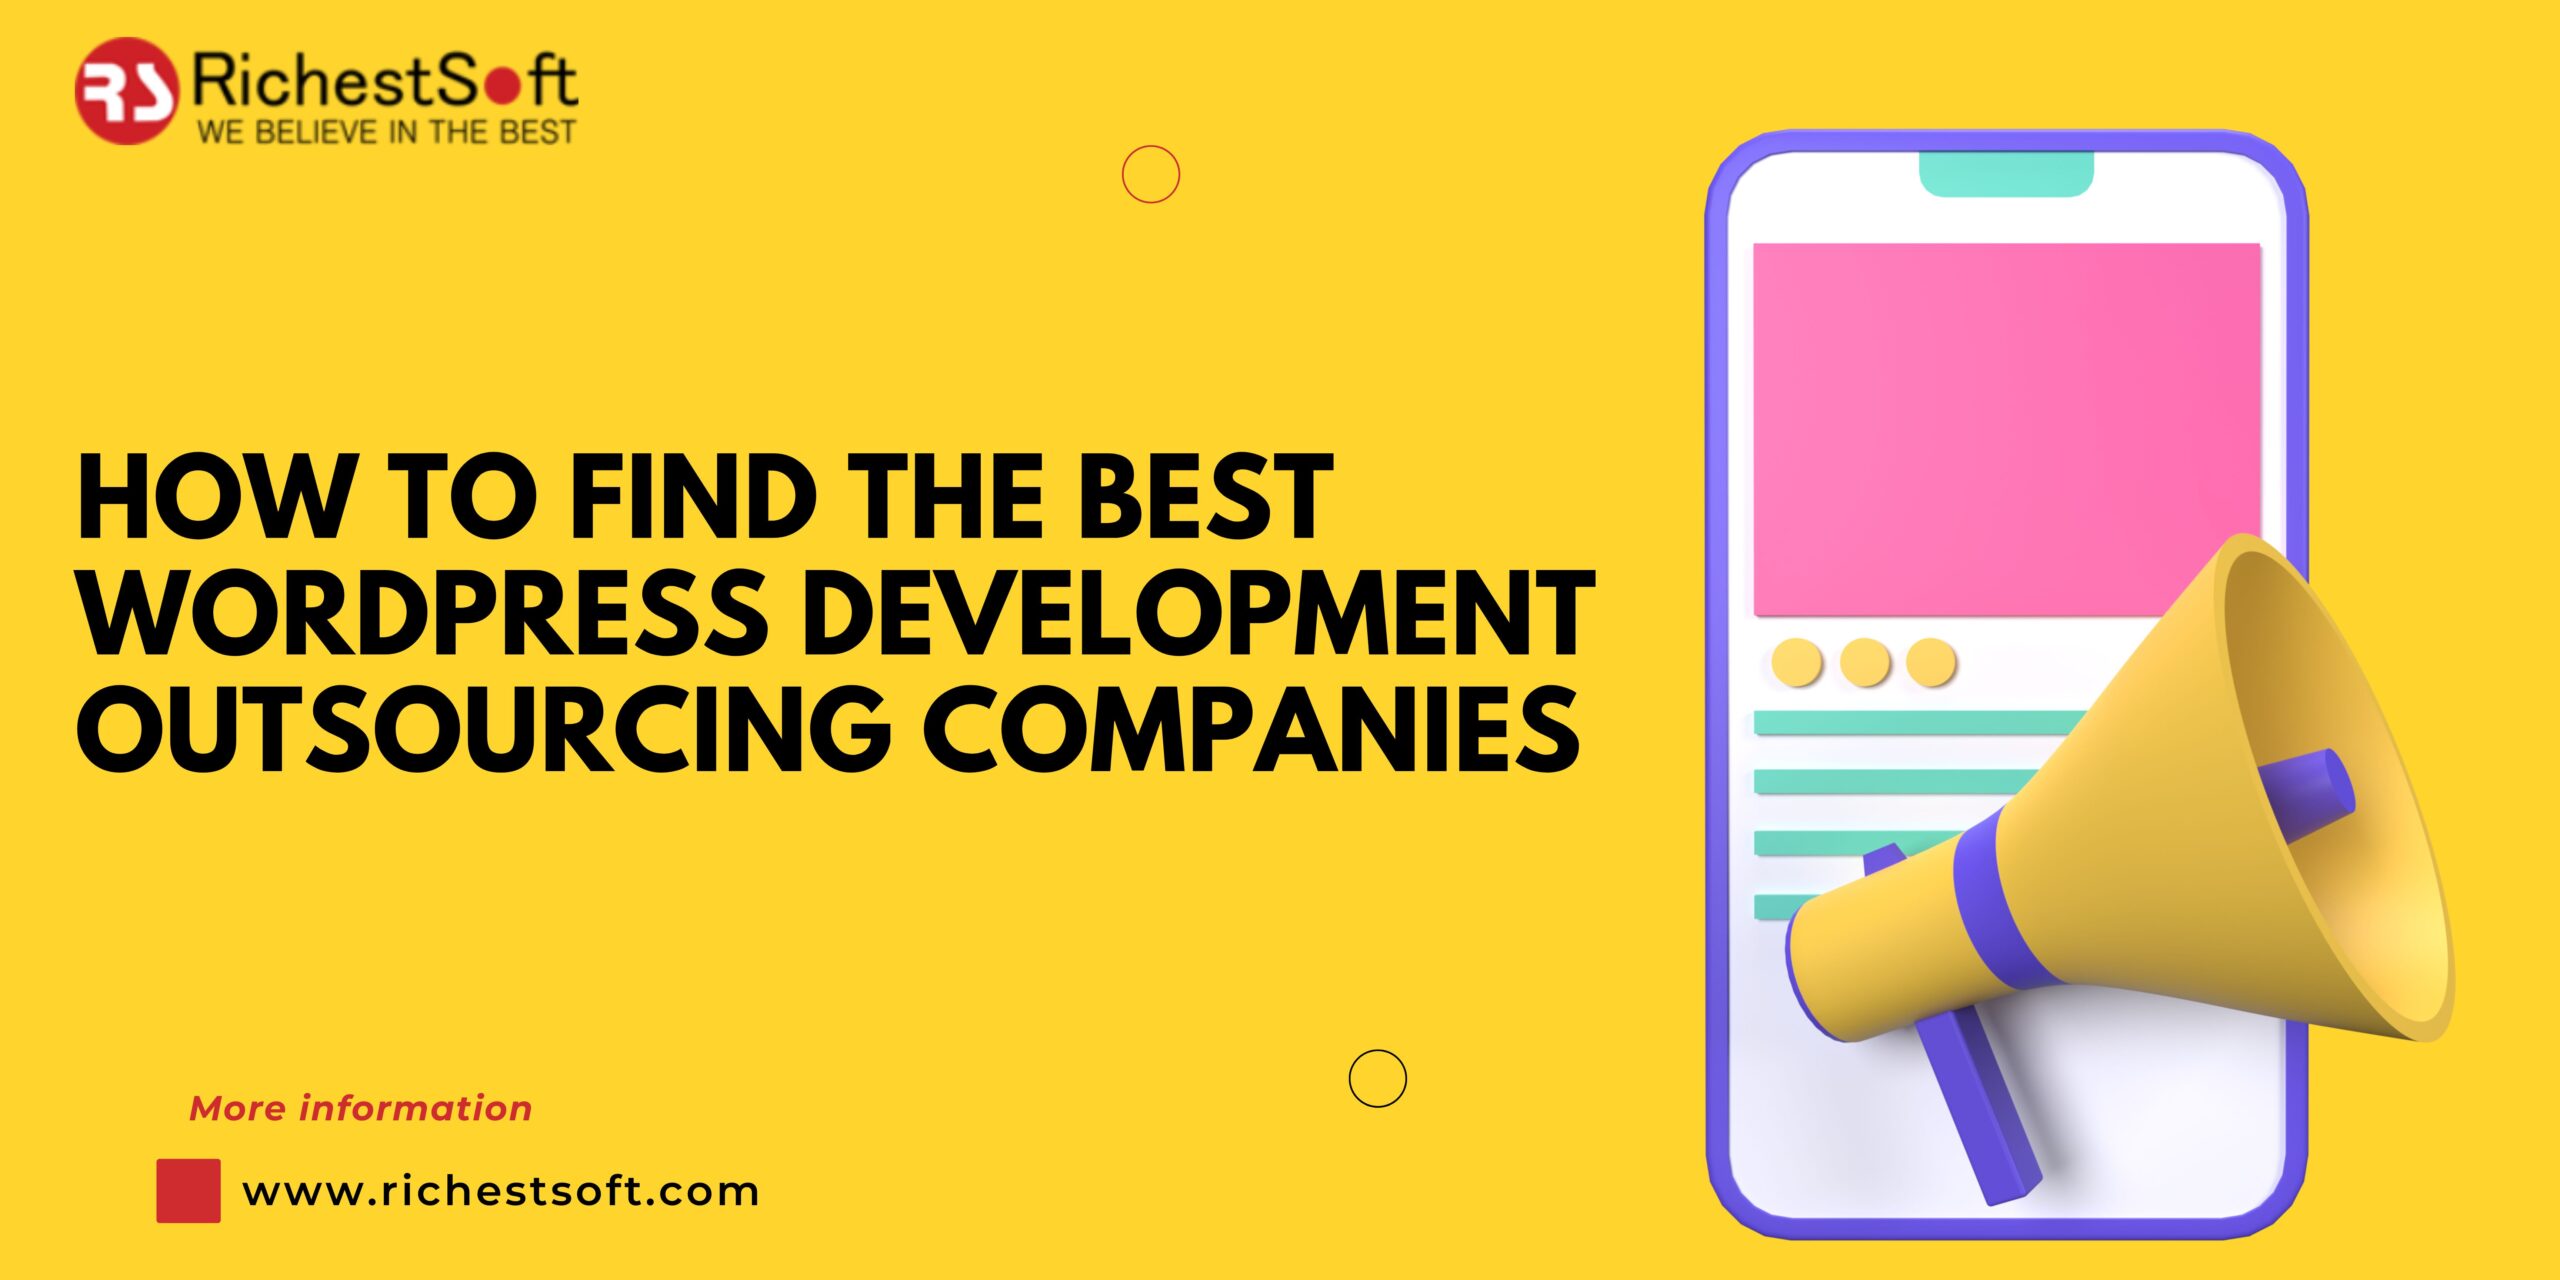 How to Find the Best WordPress Development Outsourcing Companies - Topbloginc.com